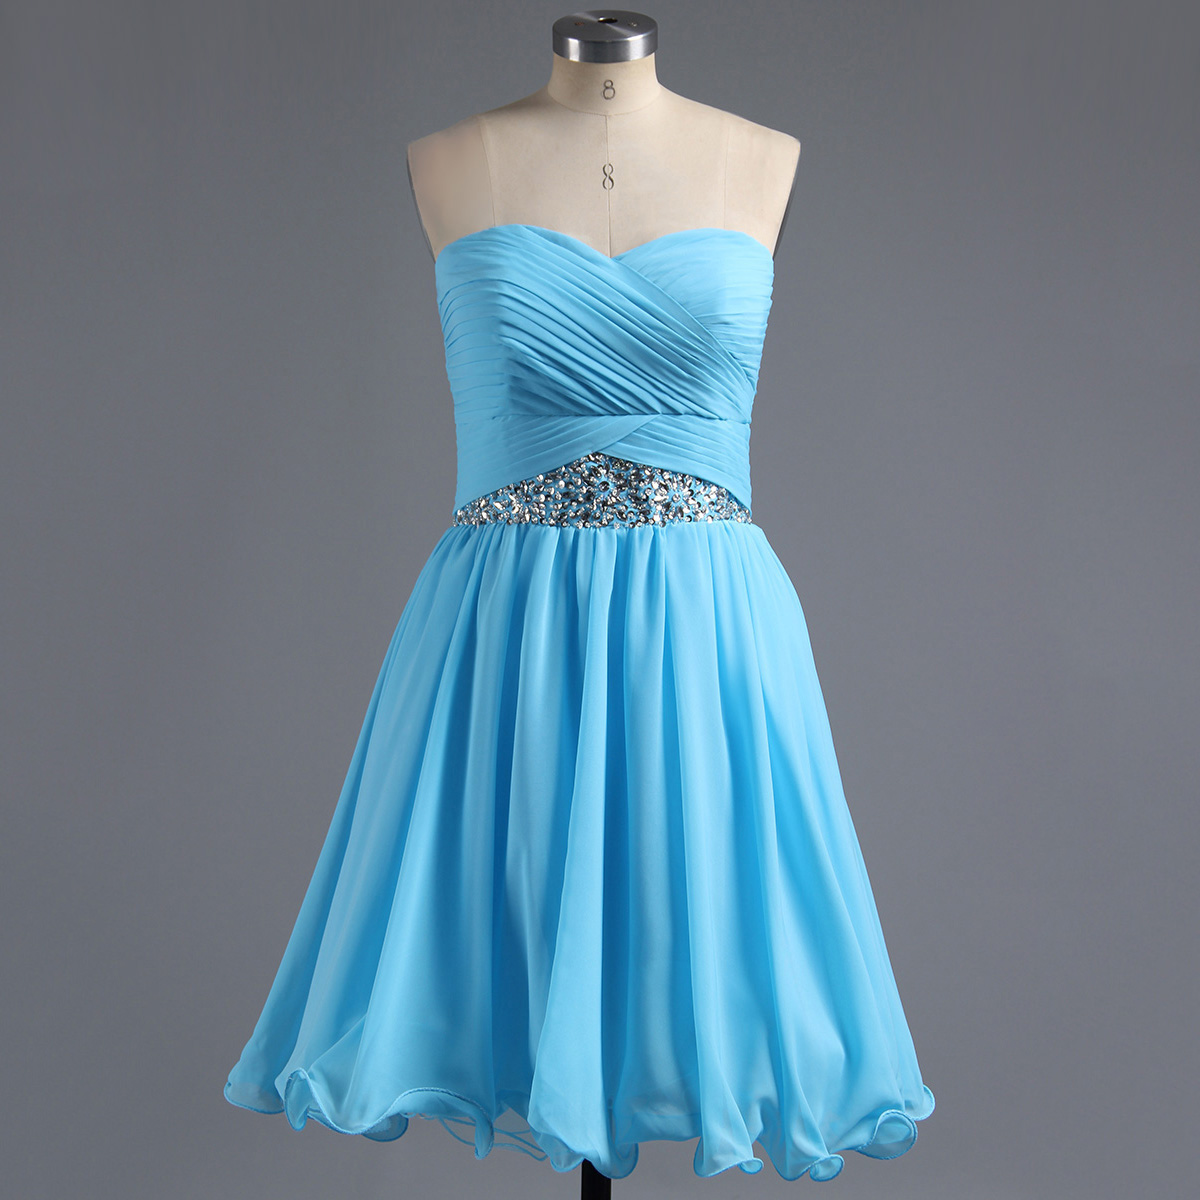 Sky Blue Chiffon Homecoming Dress, Cute A-line Homecoming Dress With Pleats, Short Homecoming Dress With Sequins And Crystal